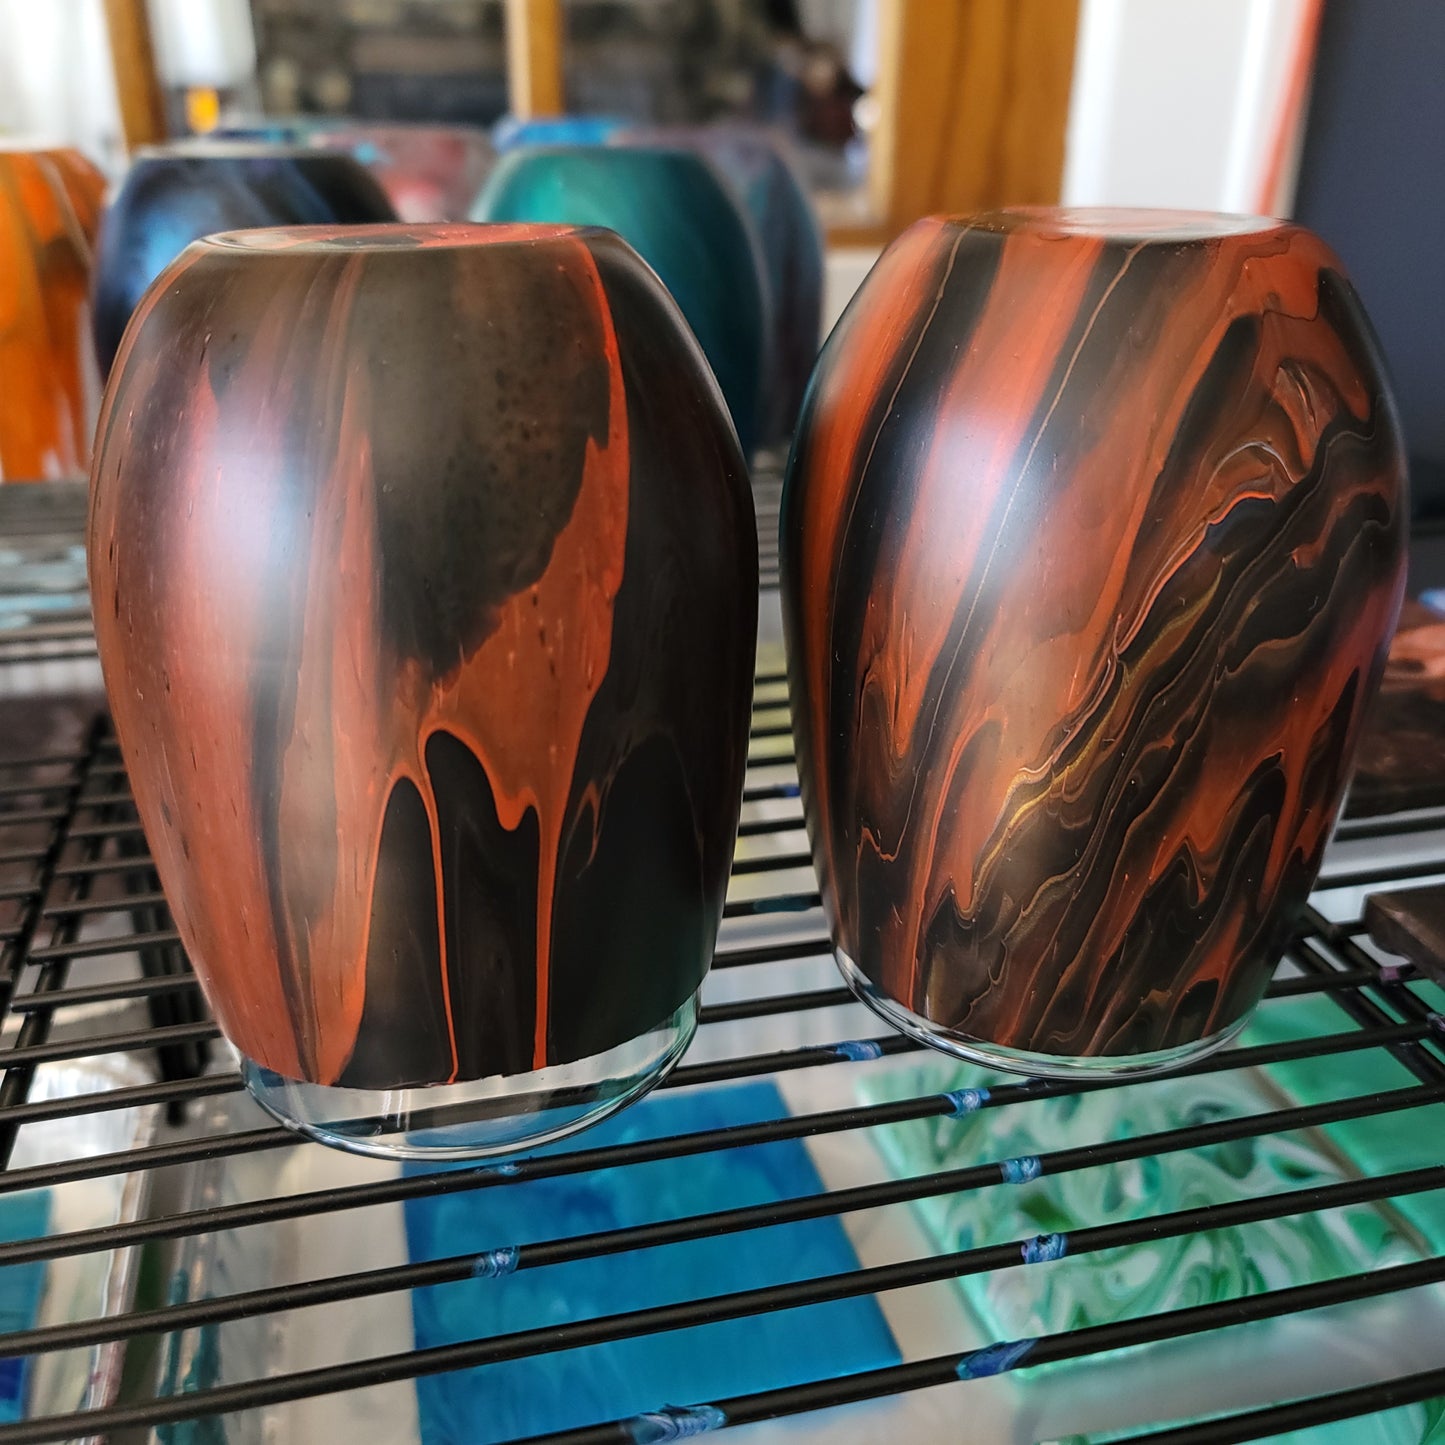 Coasters for Toasters: Paint Pour Class - June 21st @ 6pm